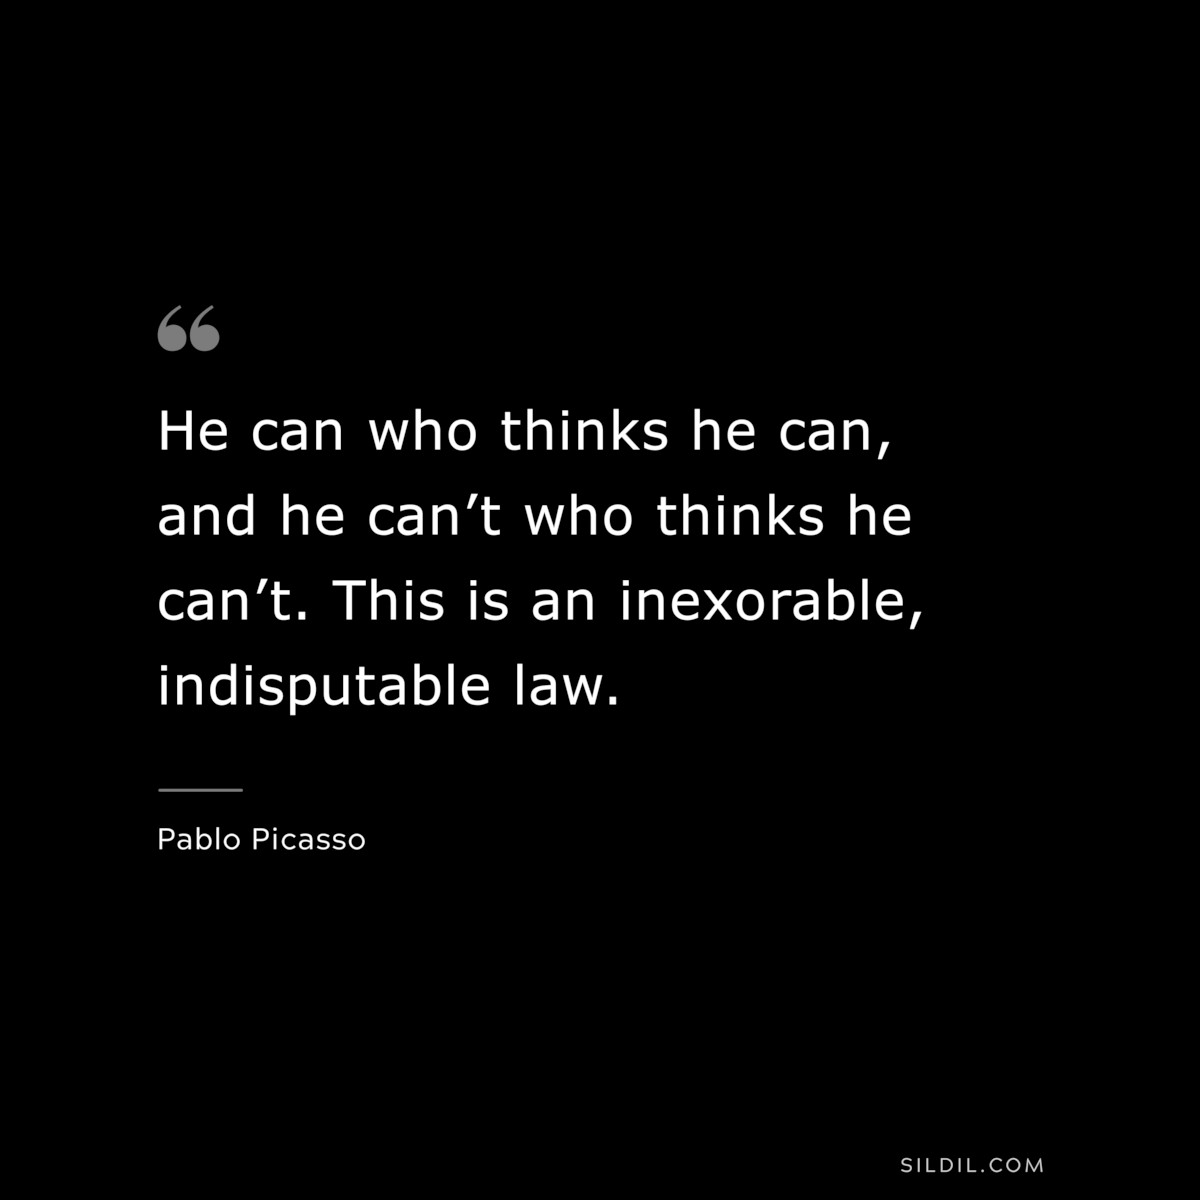 He can who thinks he can, and he can’t who thinks he can’t. This is an inexorable, indisputable law. ― Pablo Picasso